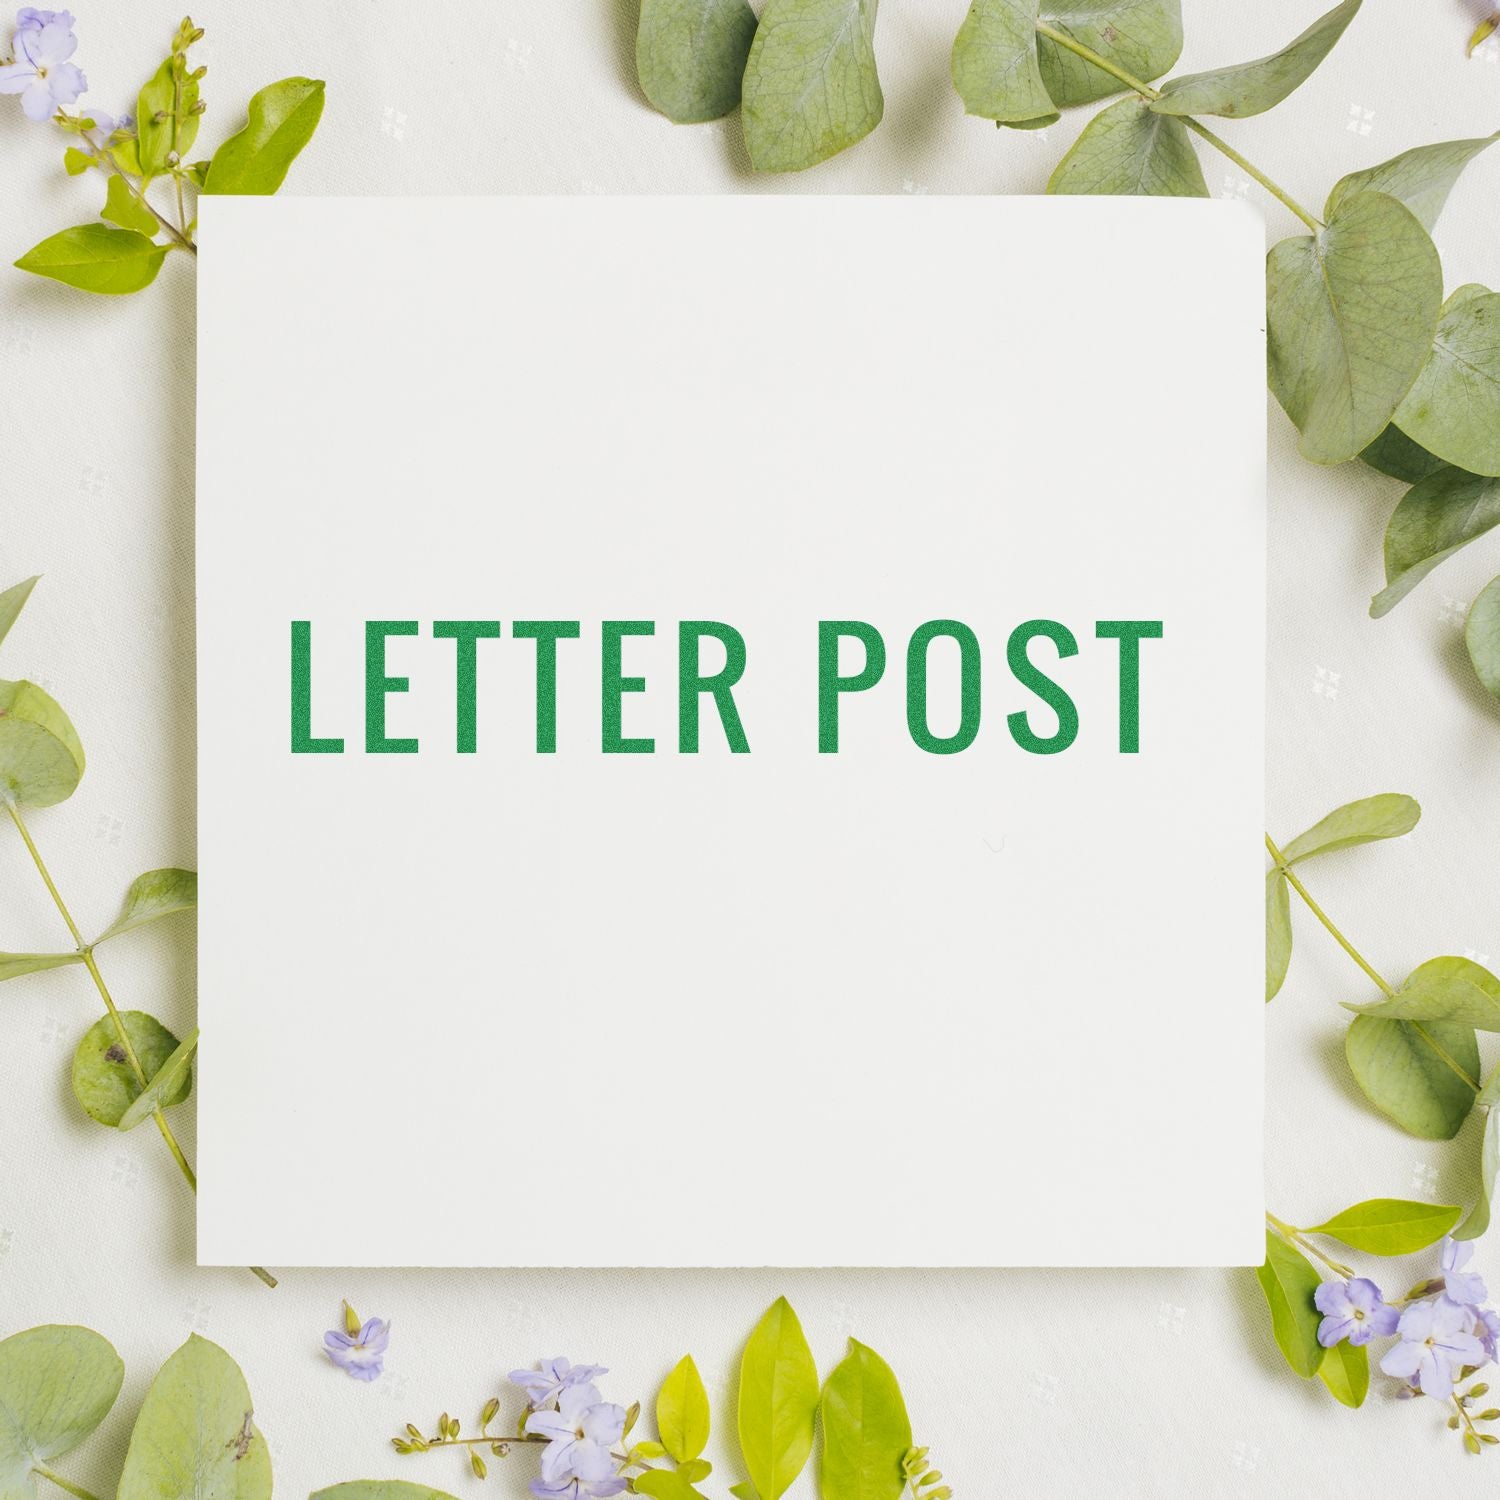 Letter Post Rubber Stamp In Use